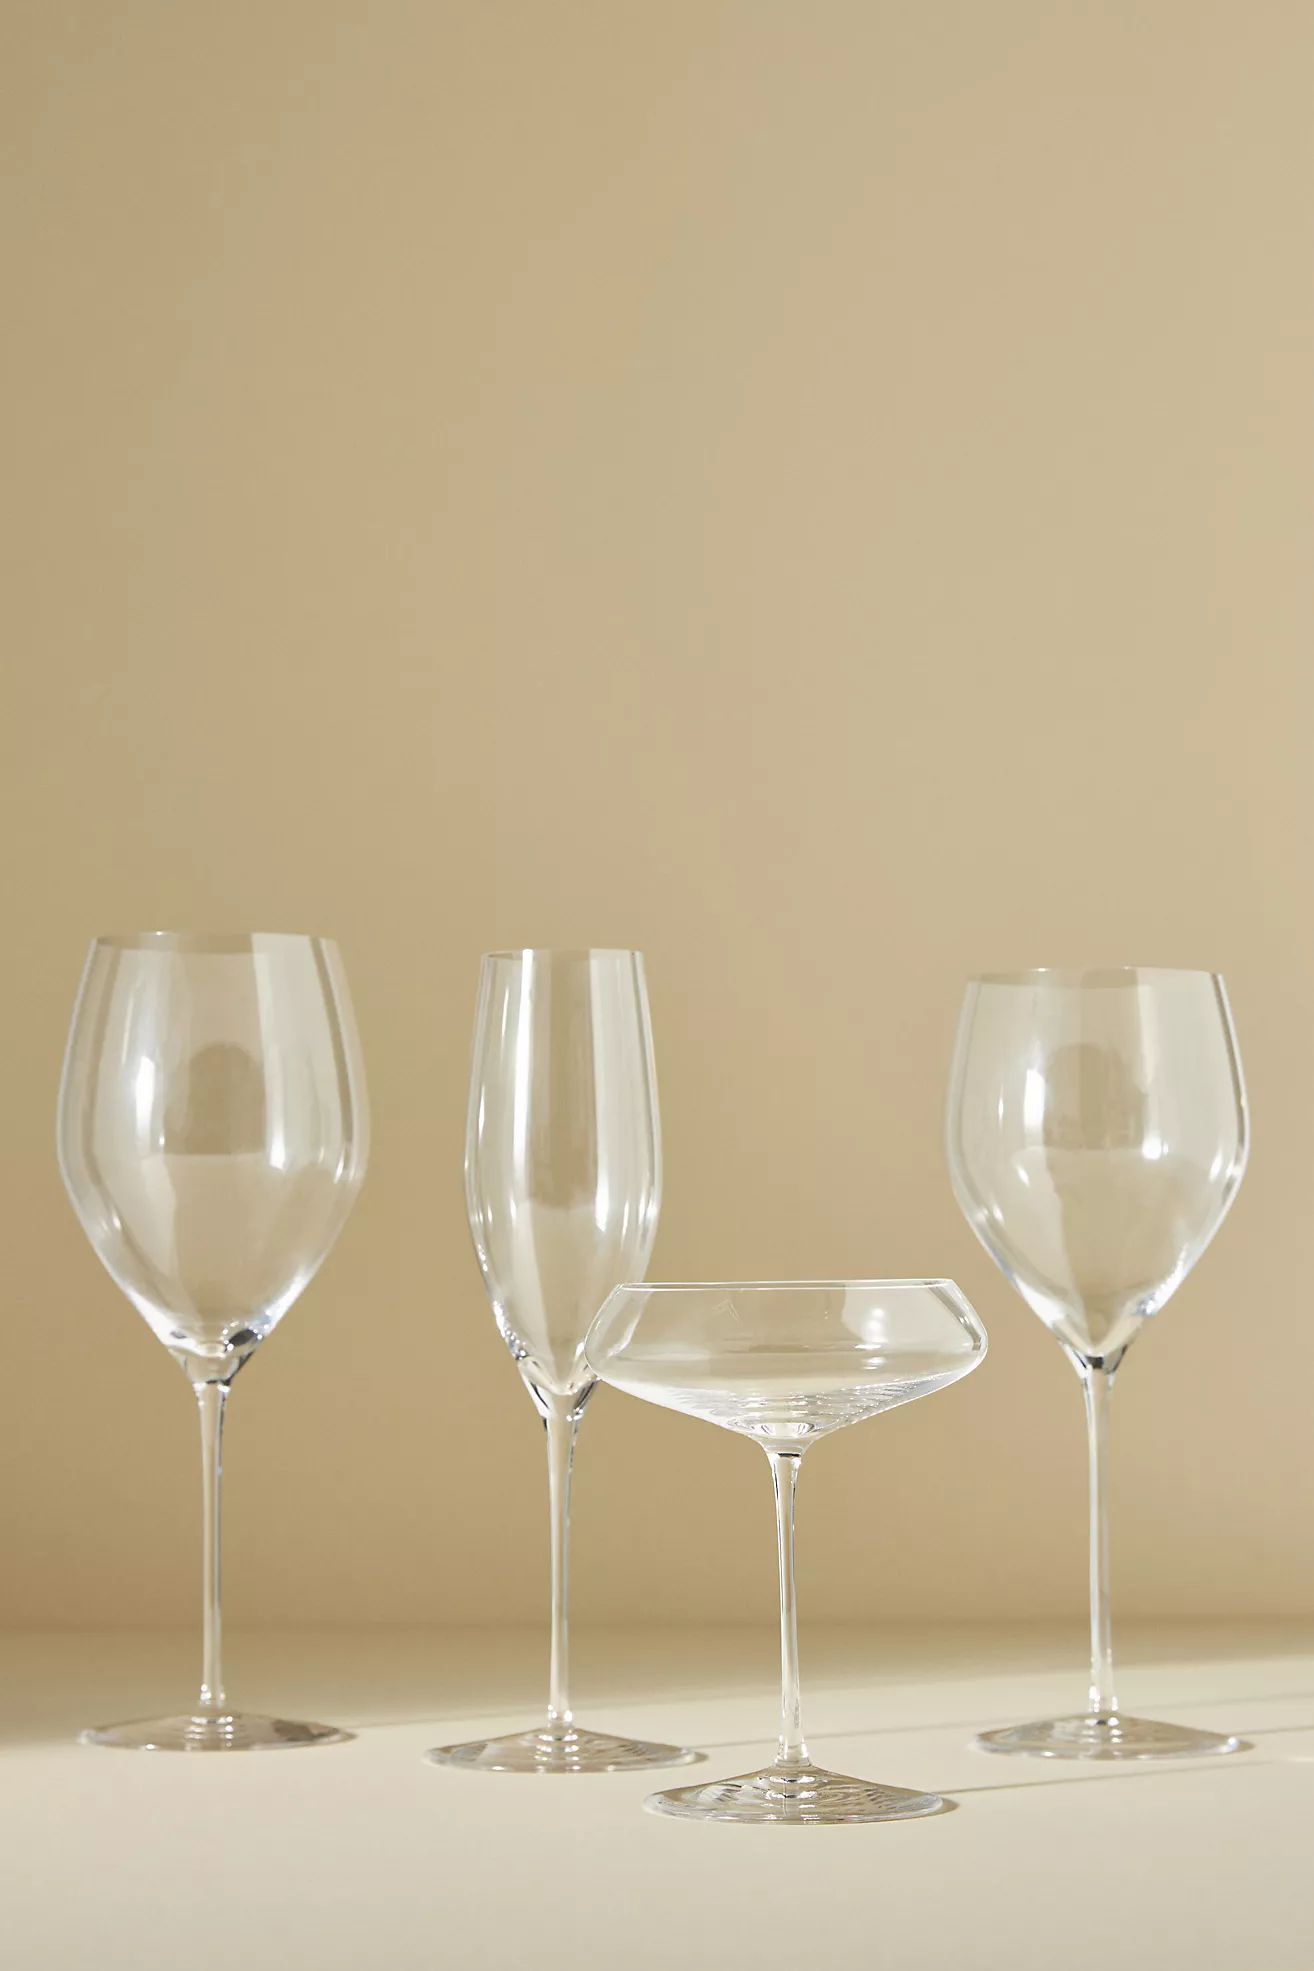 Neo Handcrafted Crystal Coupe Glasses, Set of 4 | Anthropologie (US)